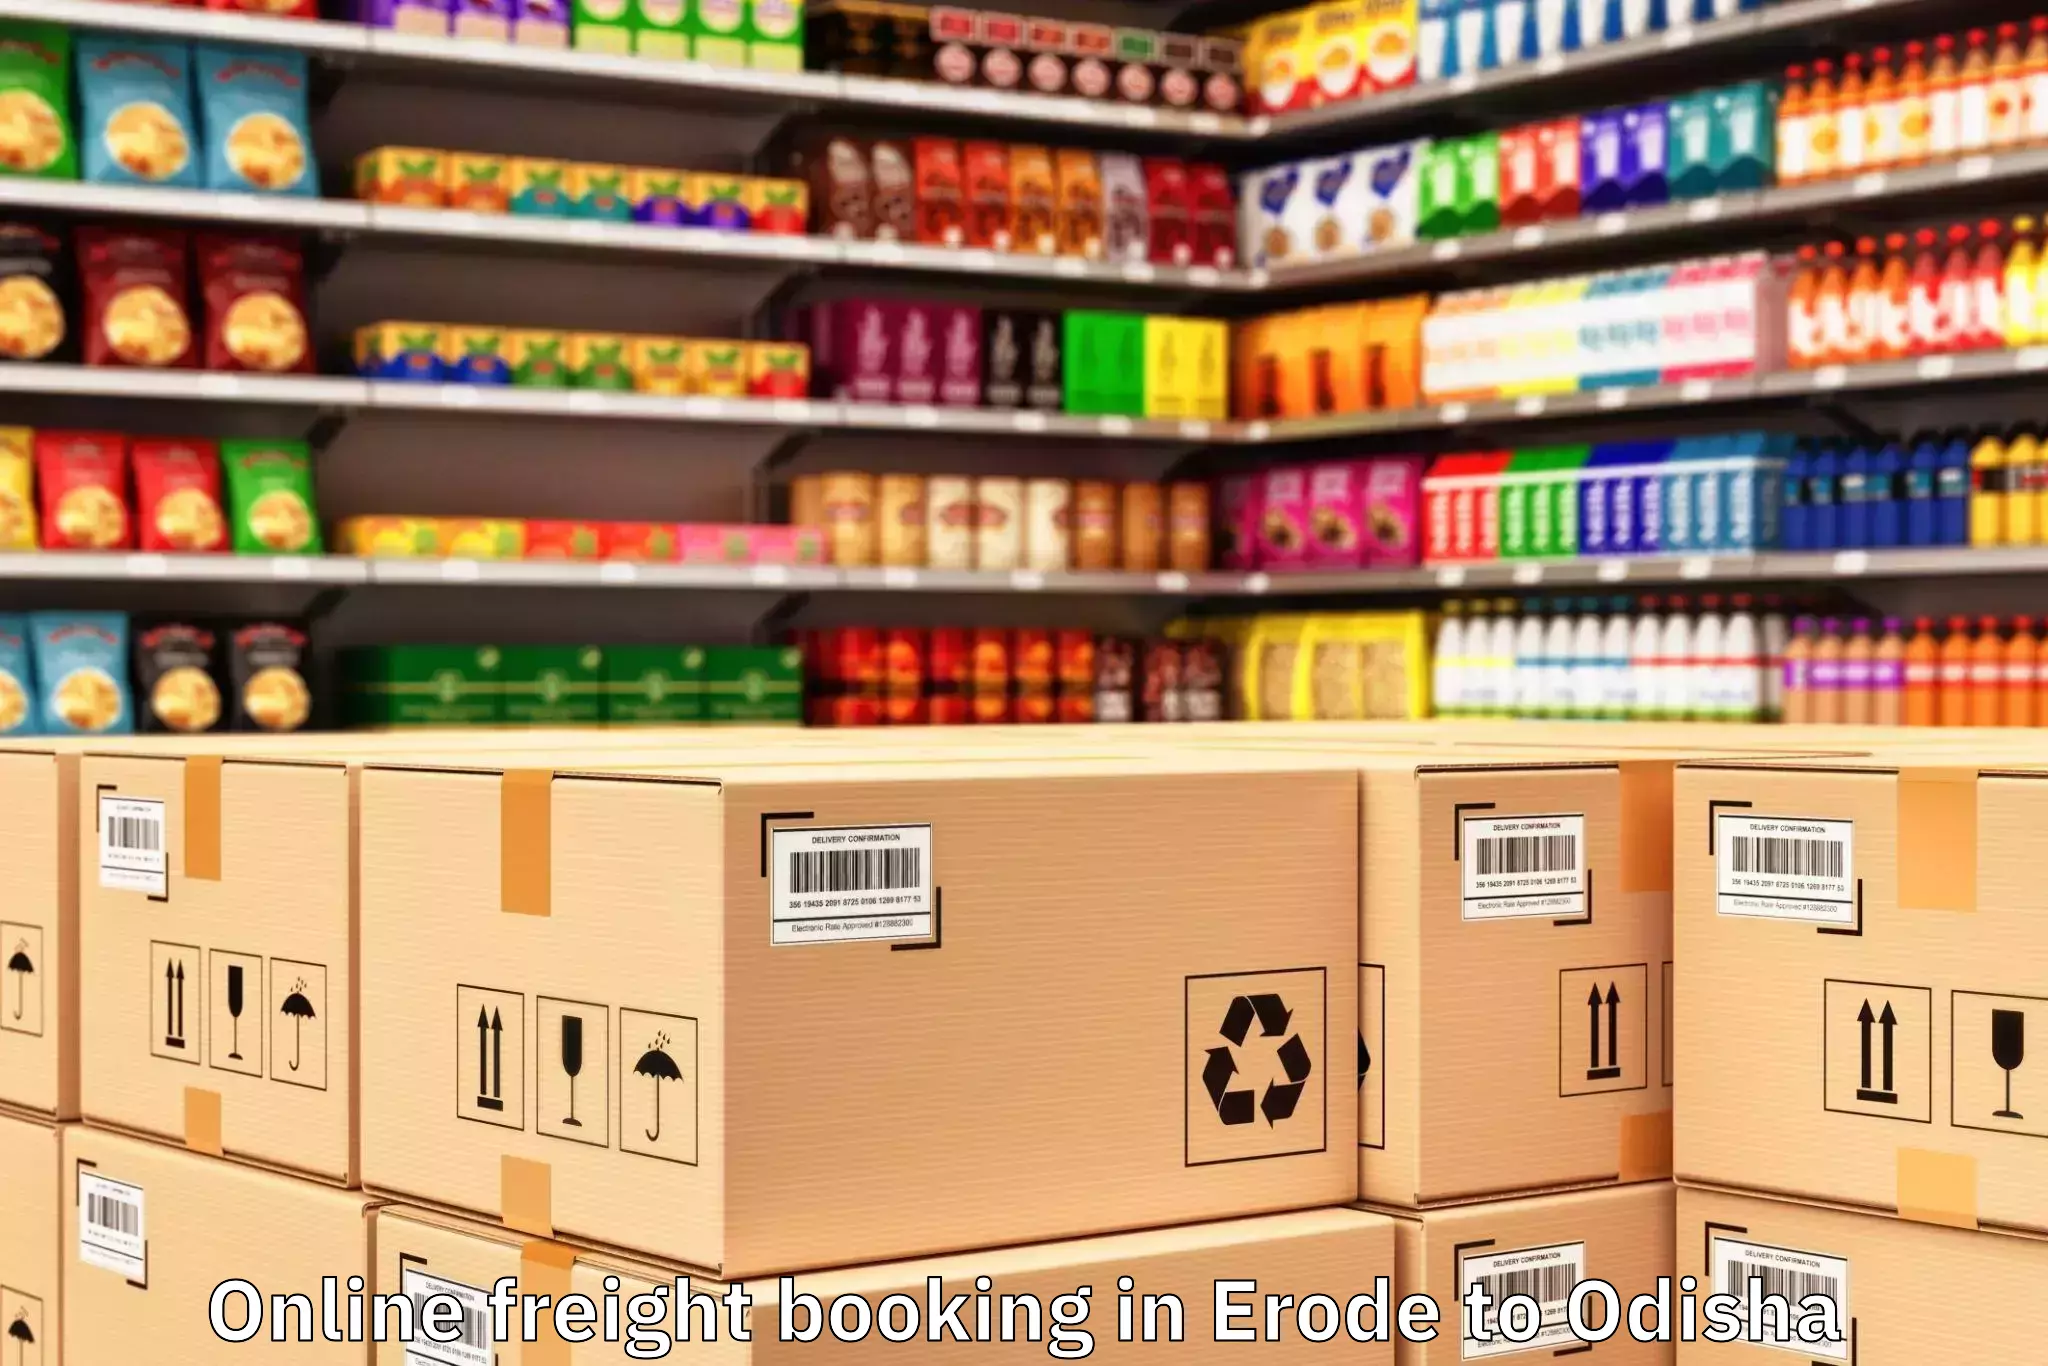 Erode to Odisha Online Freight Booking Booking